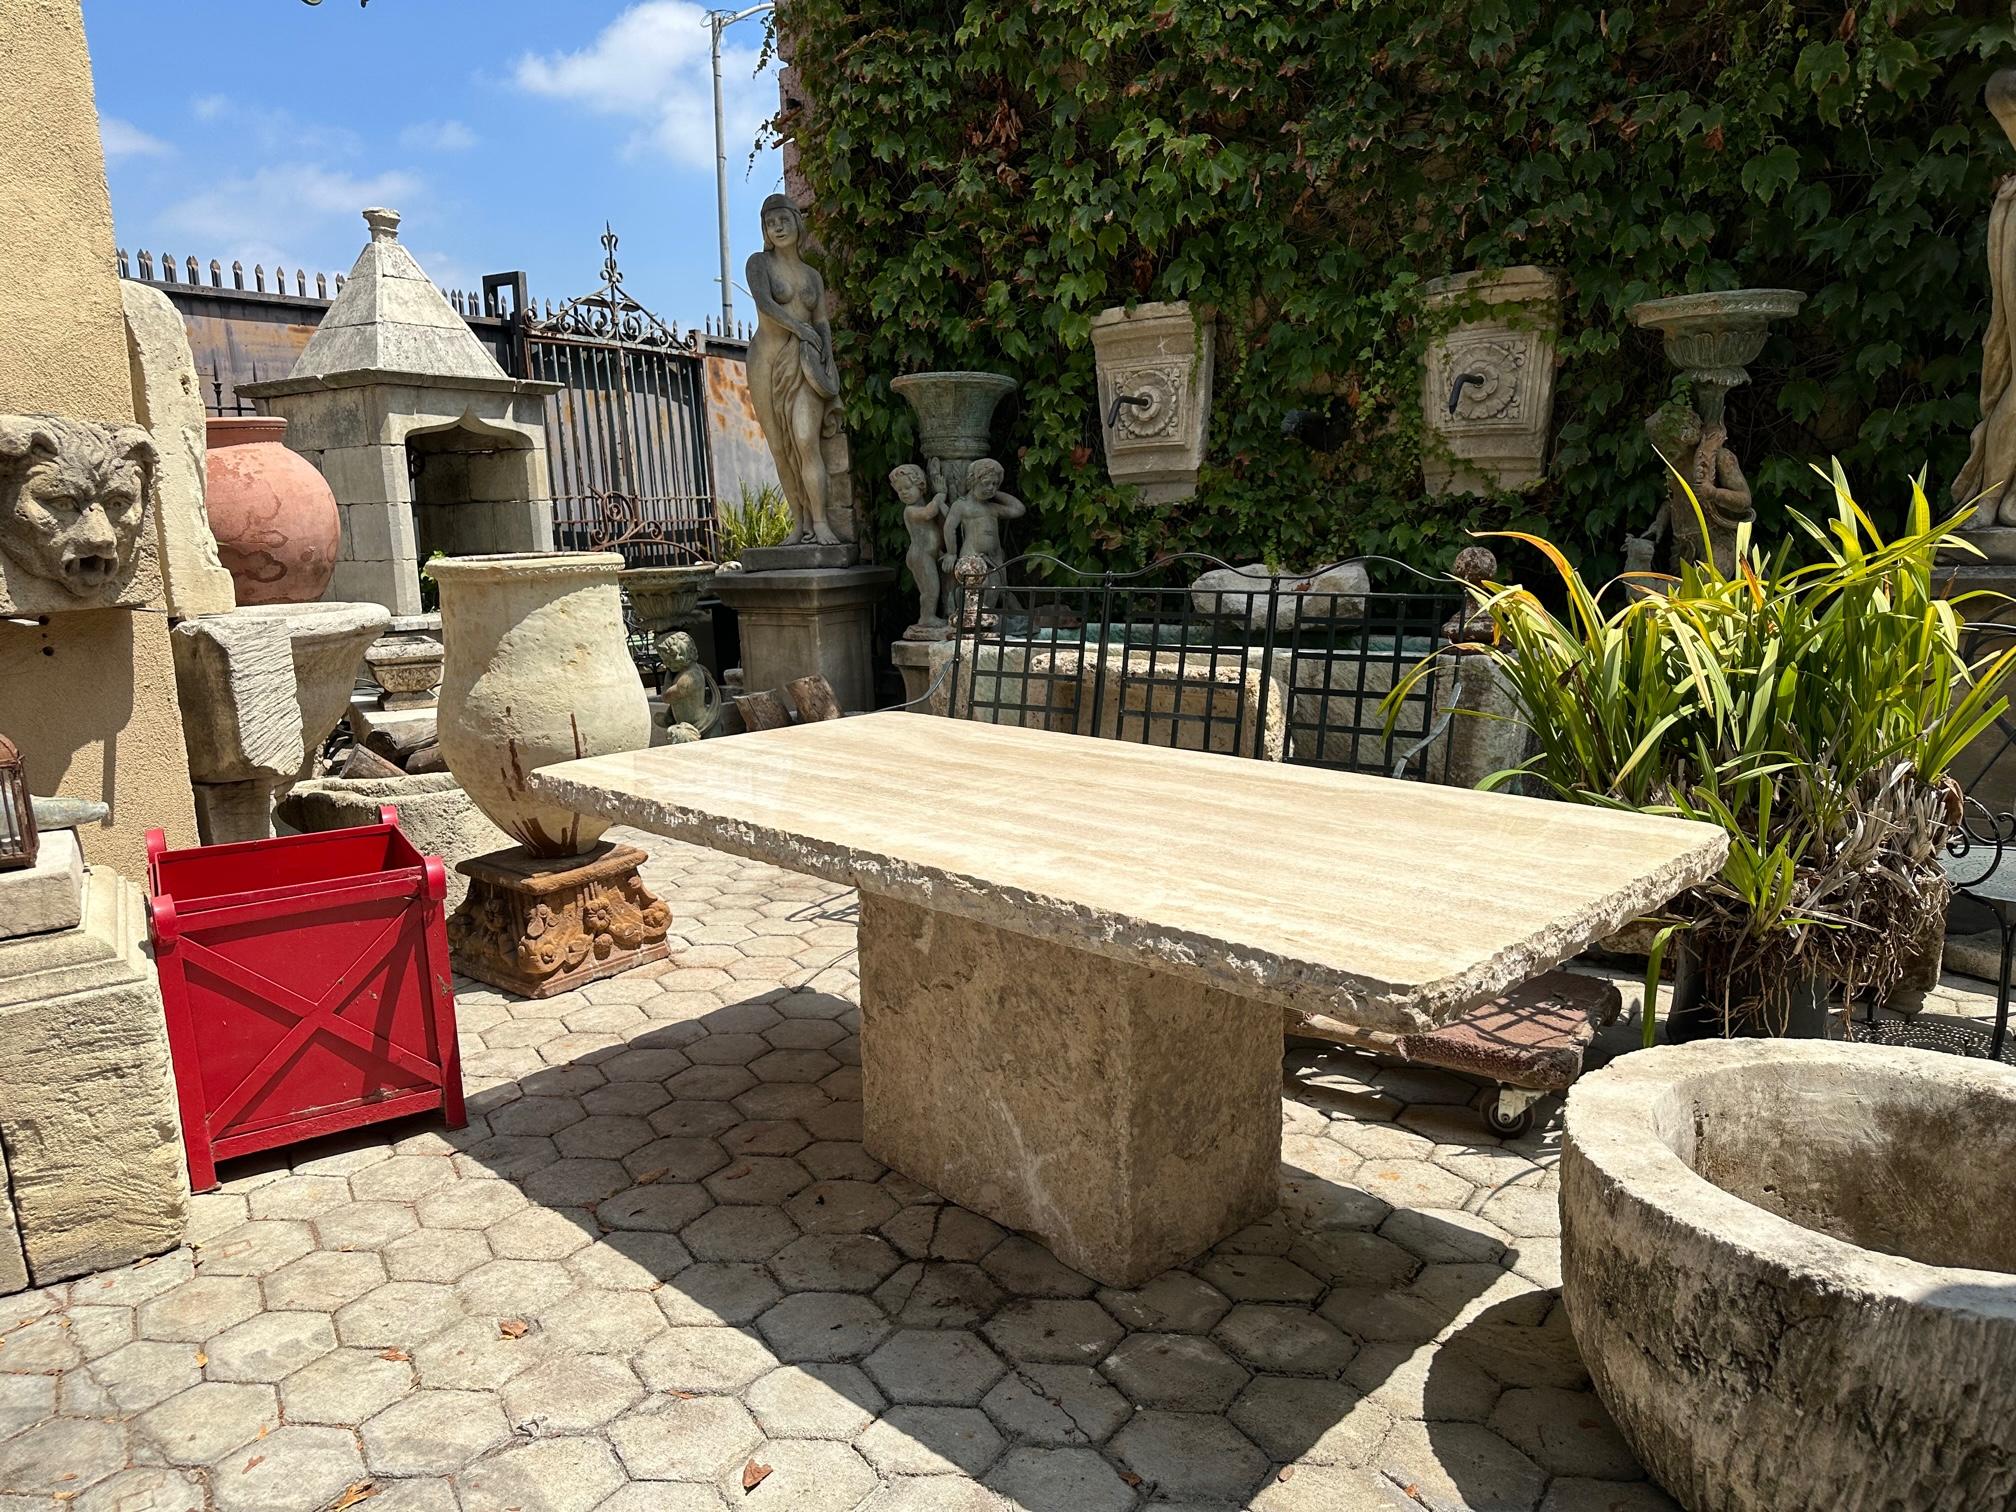 Large Reconstituted Stone Garden Outdoor Indoor dining Table Farm Rustic Antique In Good Condition For Sale In West Hollywood, CA